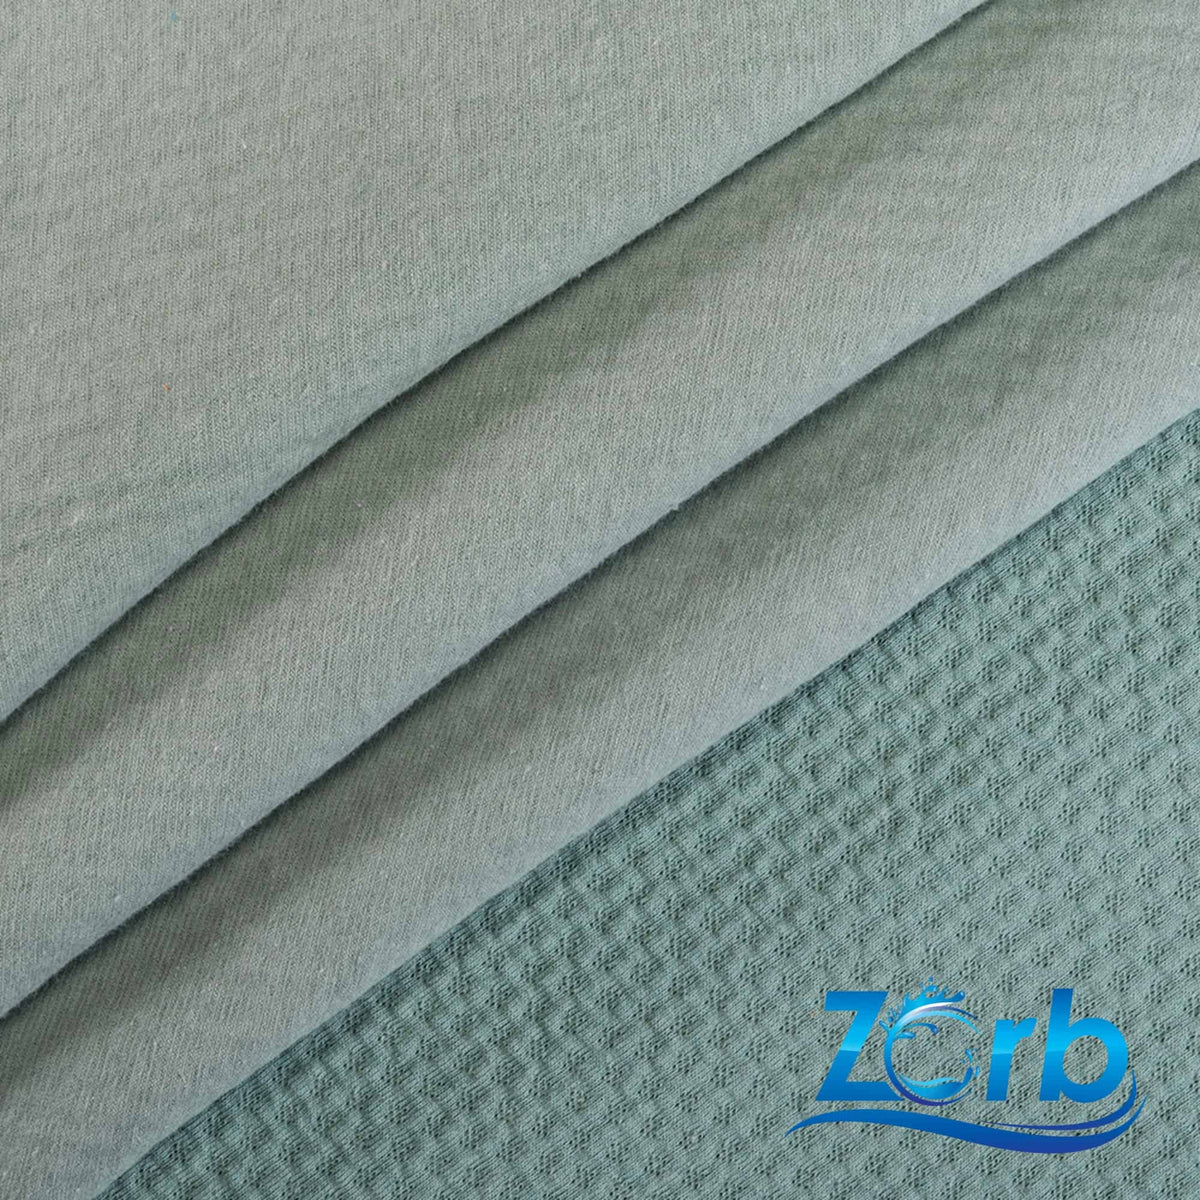 1/2 Yard - Zorb® Super-Absorbent Non-woven Fabric